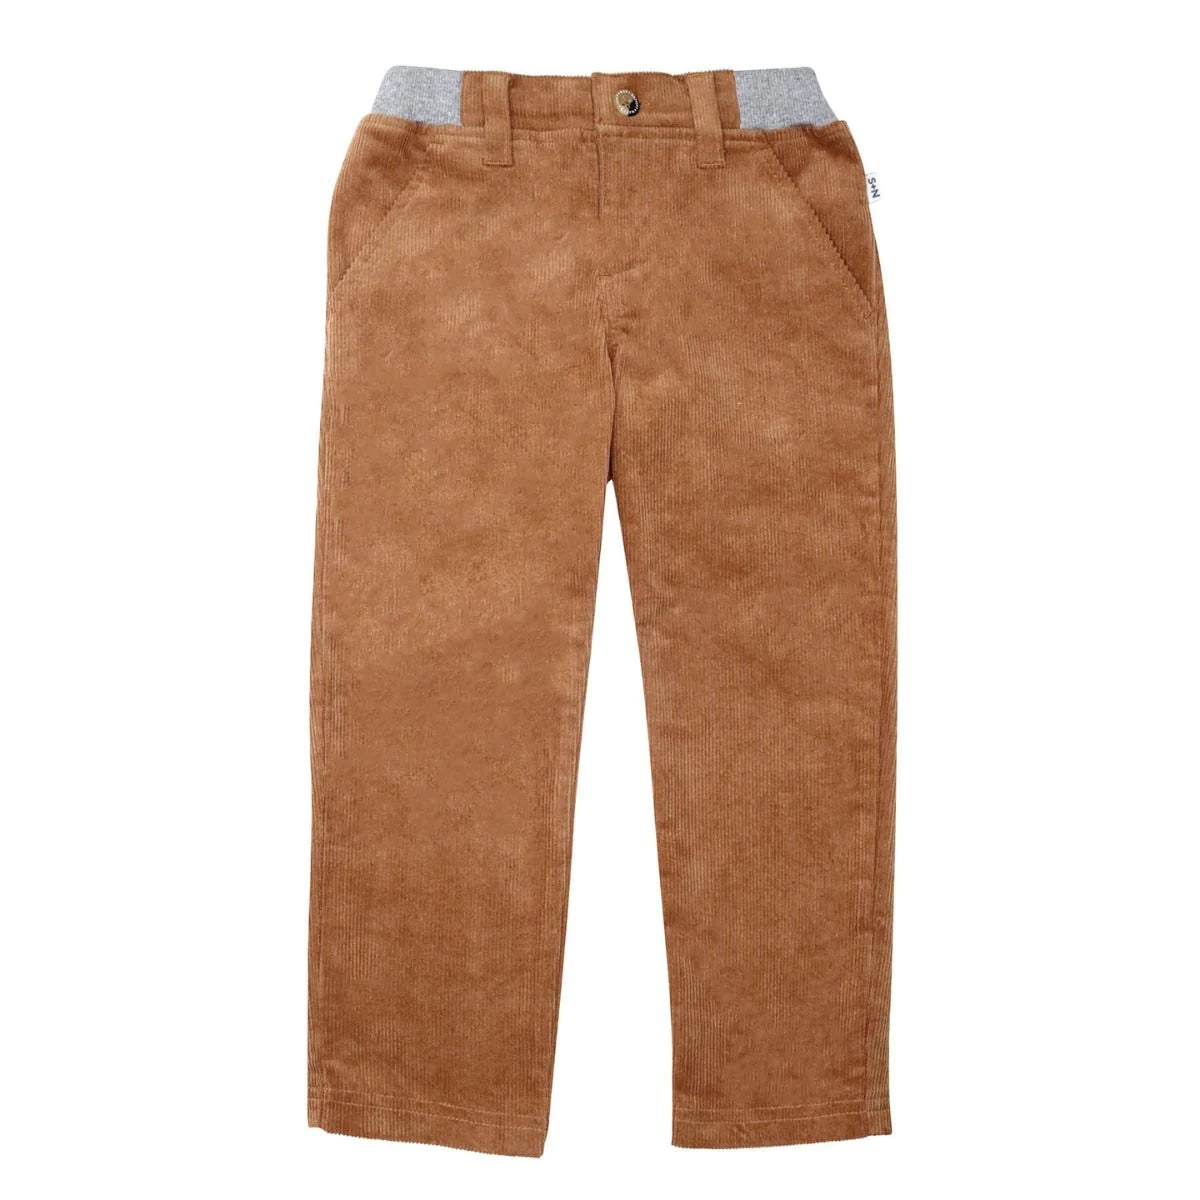 Ford Corduroy Pant in Tan